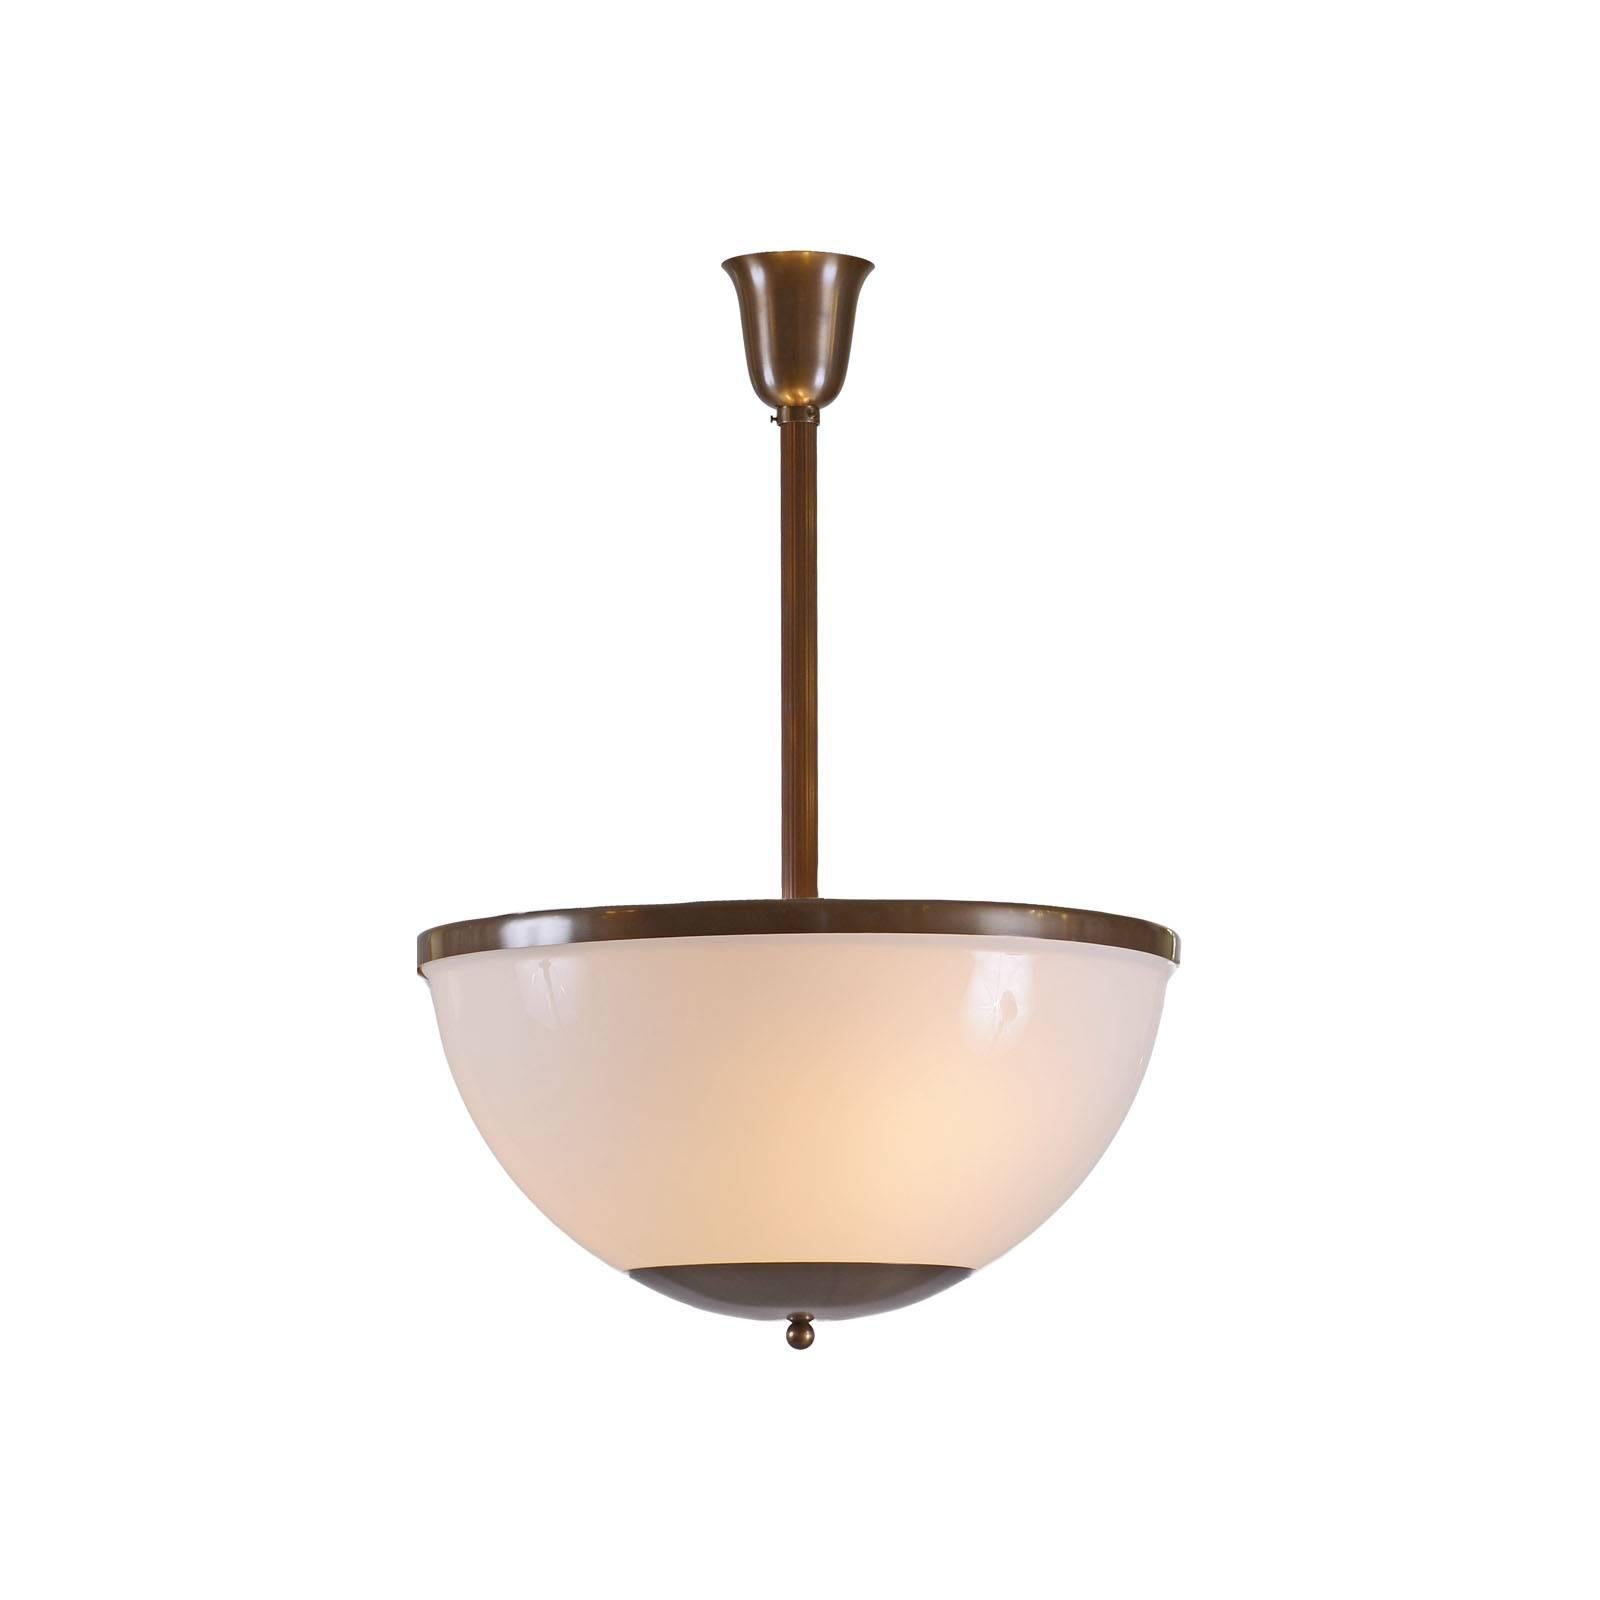 Ceiling light with opaline glass shade, different sizes, comes as well as a downlight.